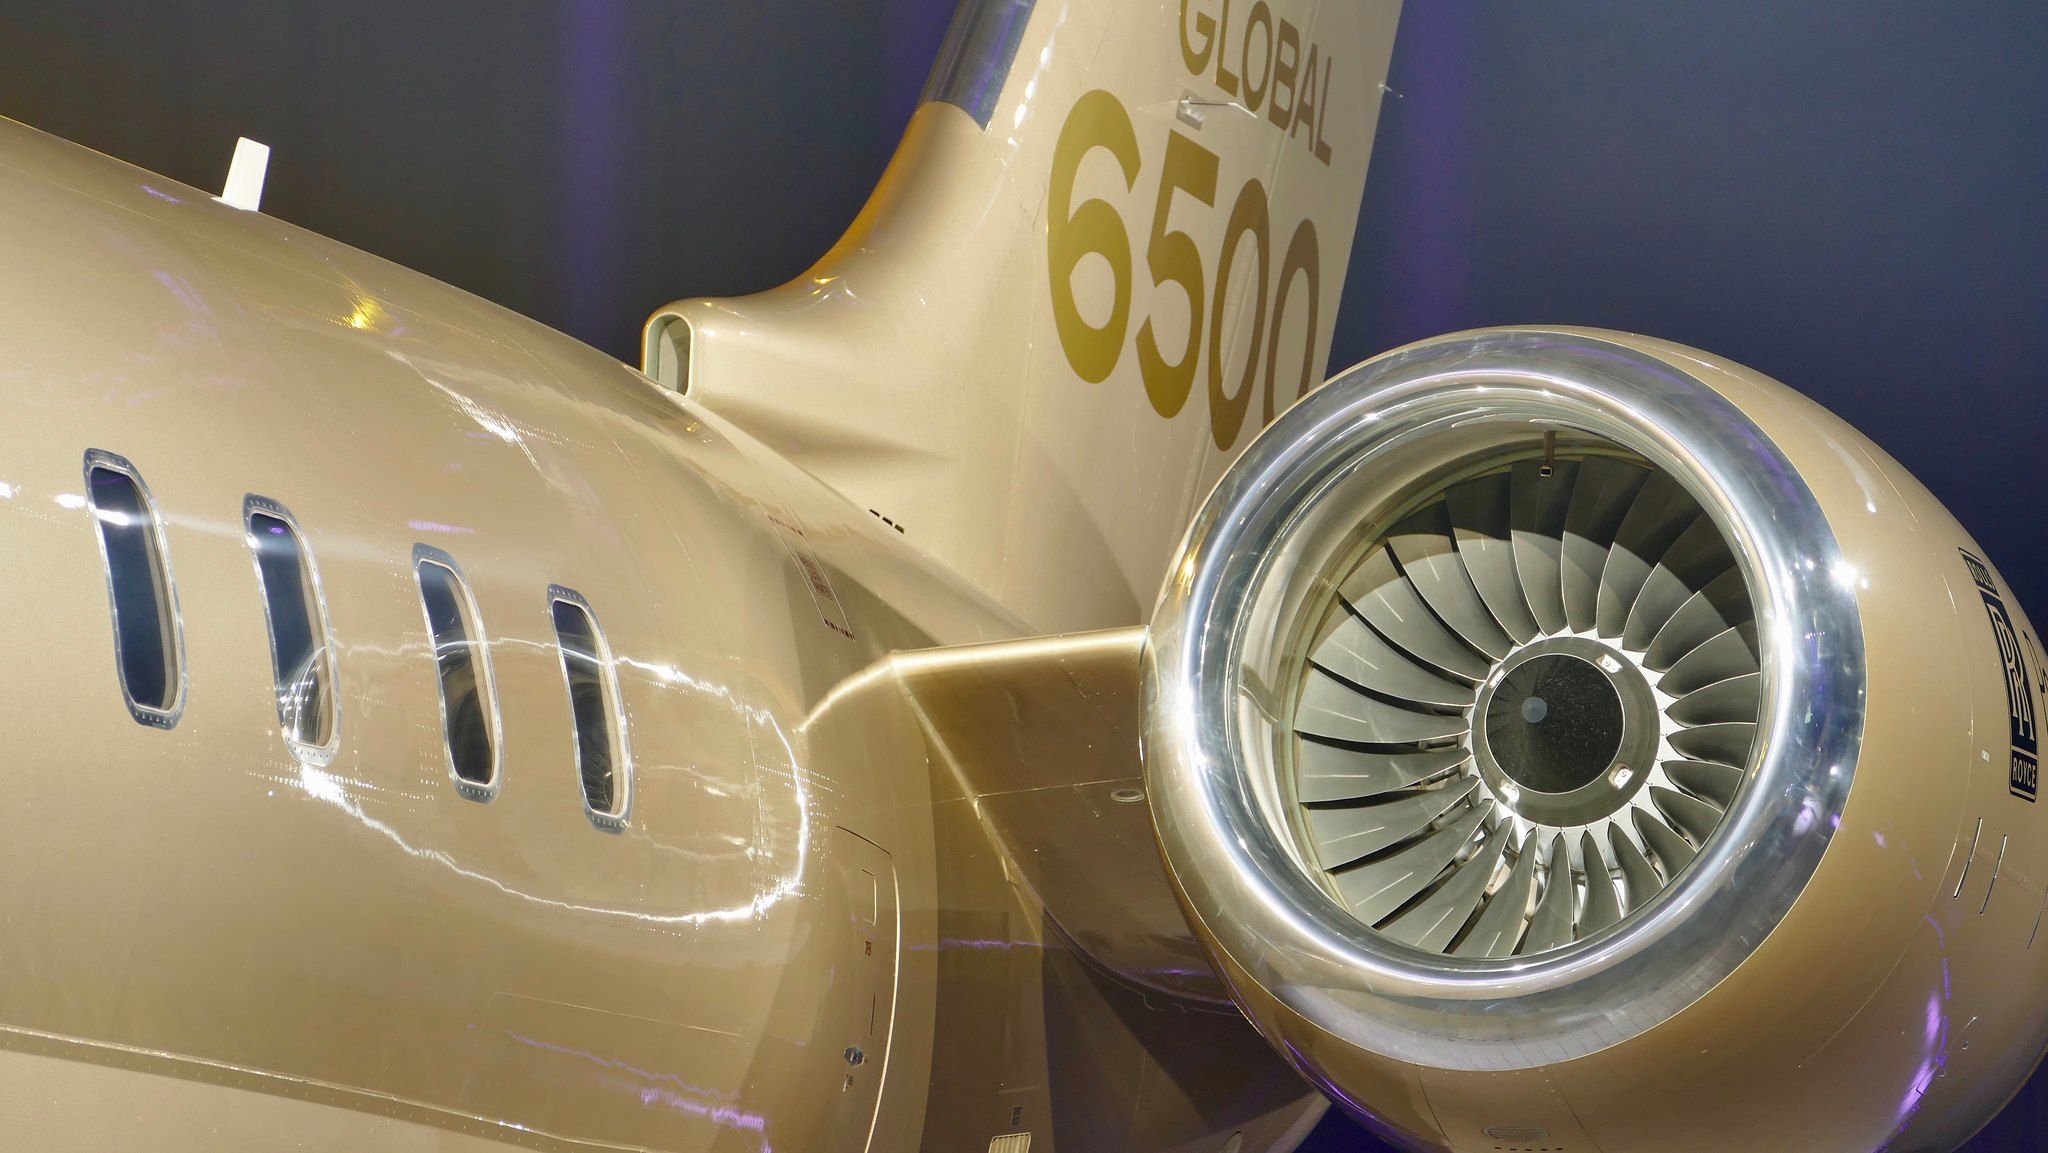 Powering The Bombardier Global 6500: A Look At The Rolls-Royce 